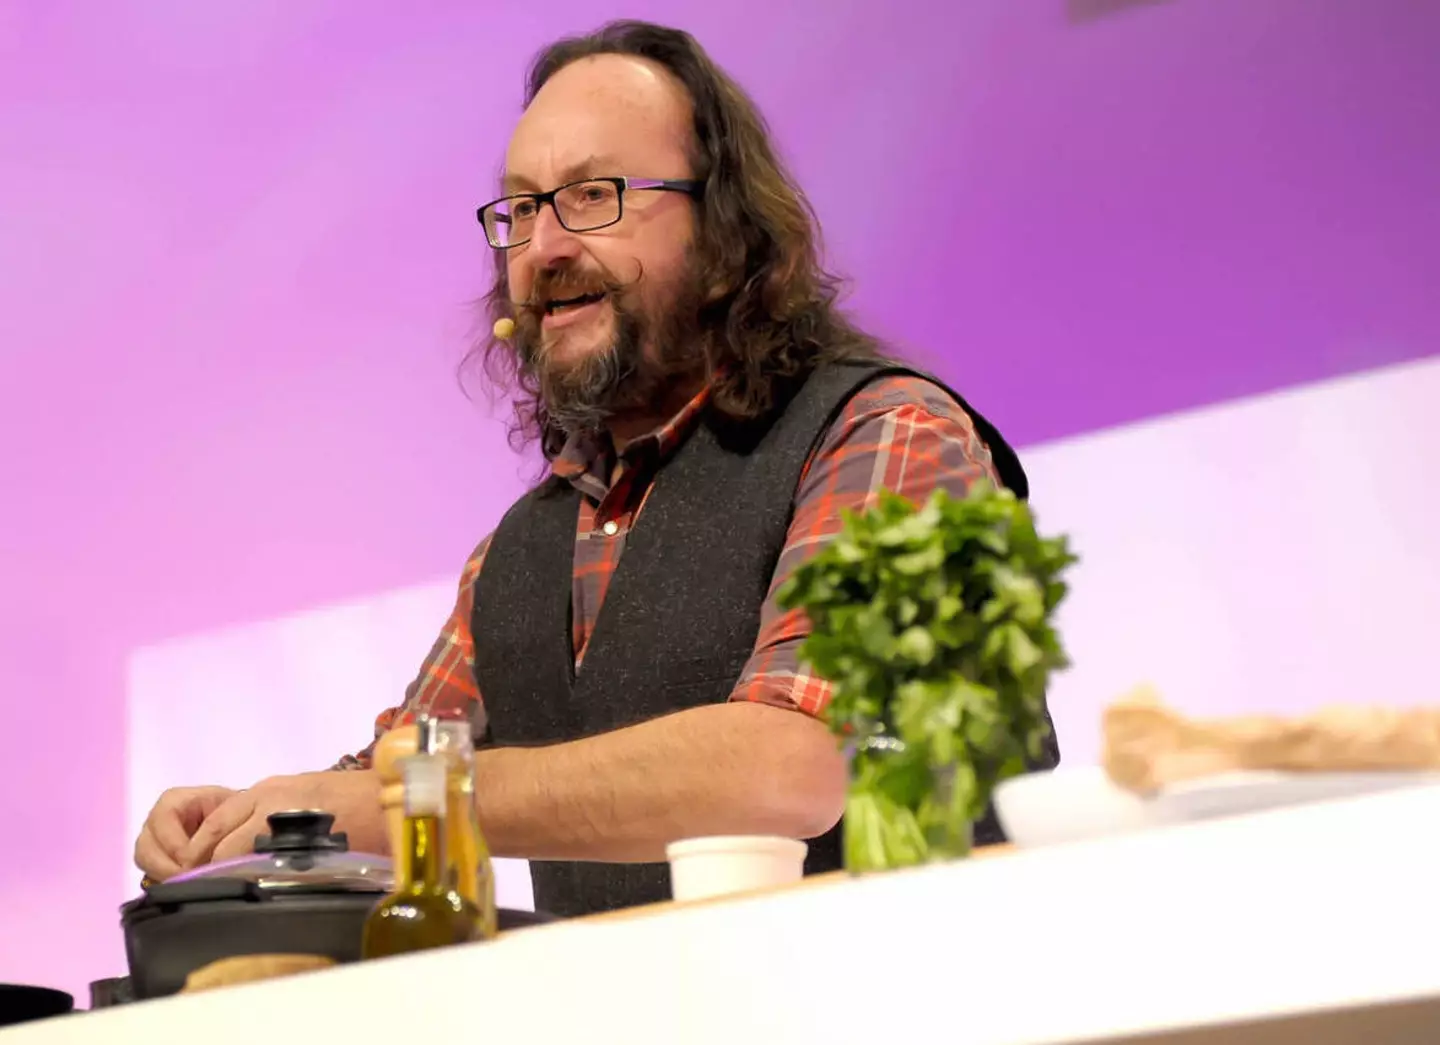 Hairy Bikers' Dave Myers opens up about treatment.